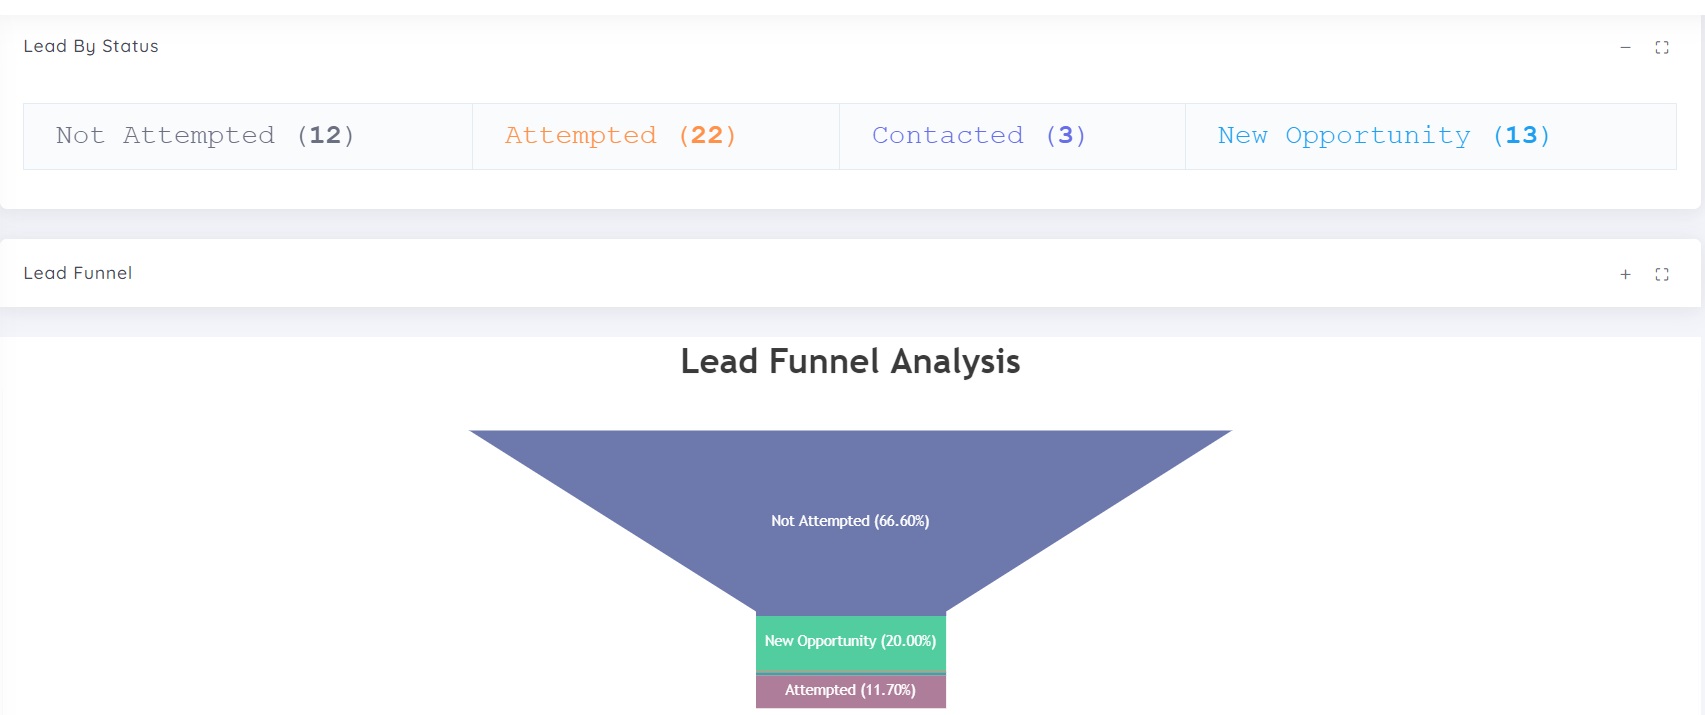 Lead Funnel Analysis